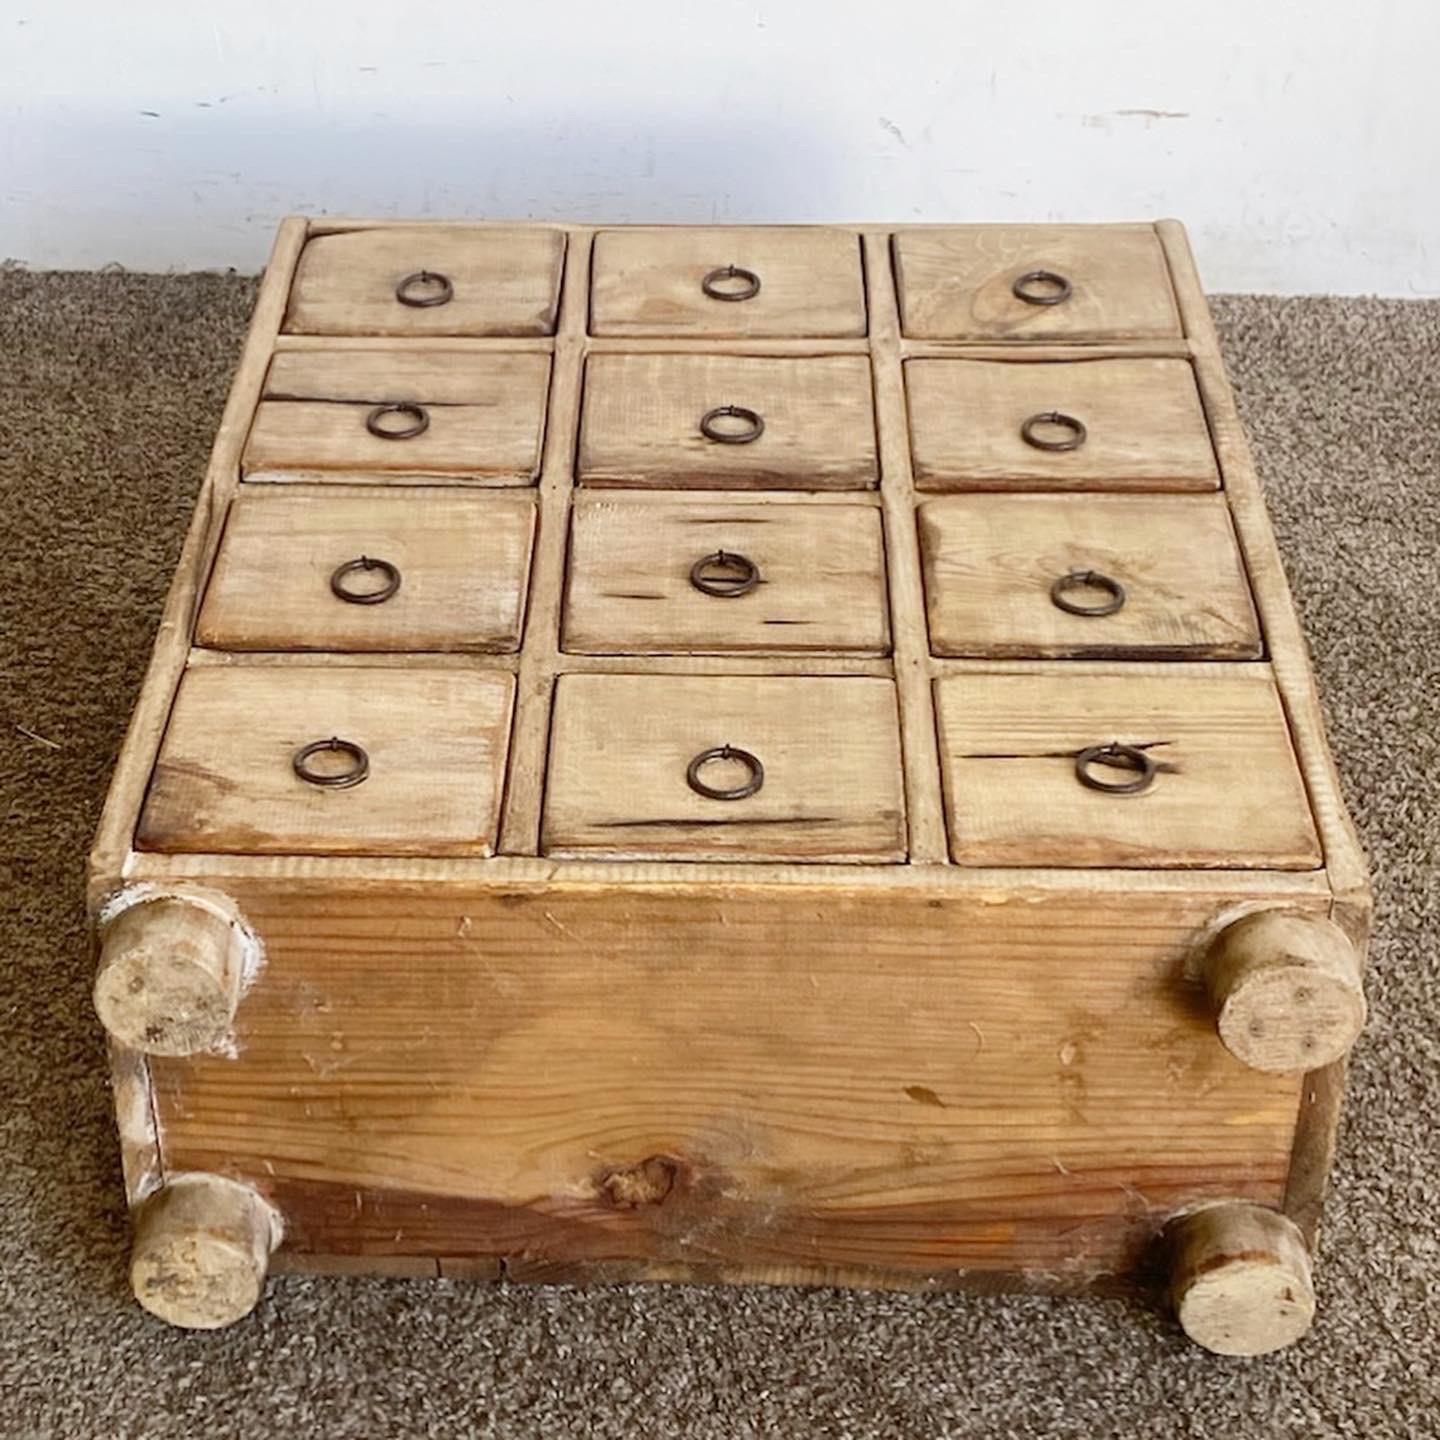 Rustic Farmhouse Apothecary Chest of Drawers - 12 Drawers 1